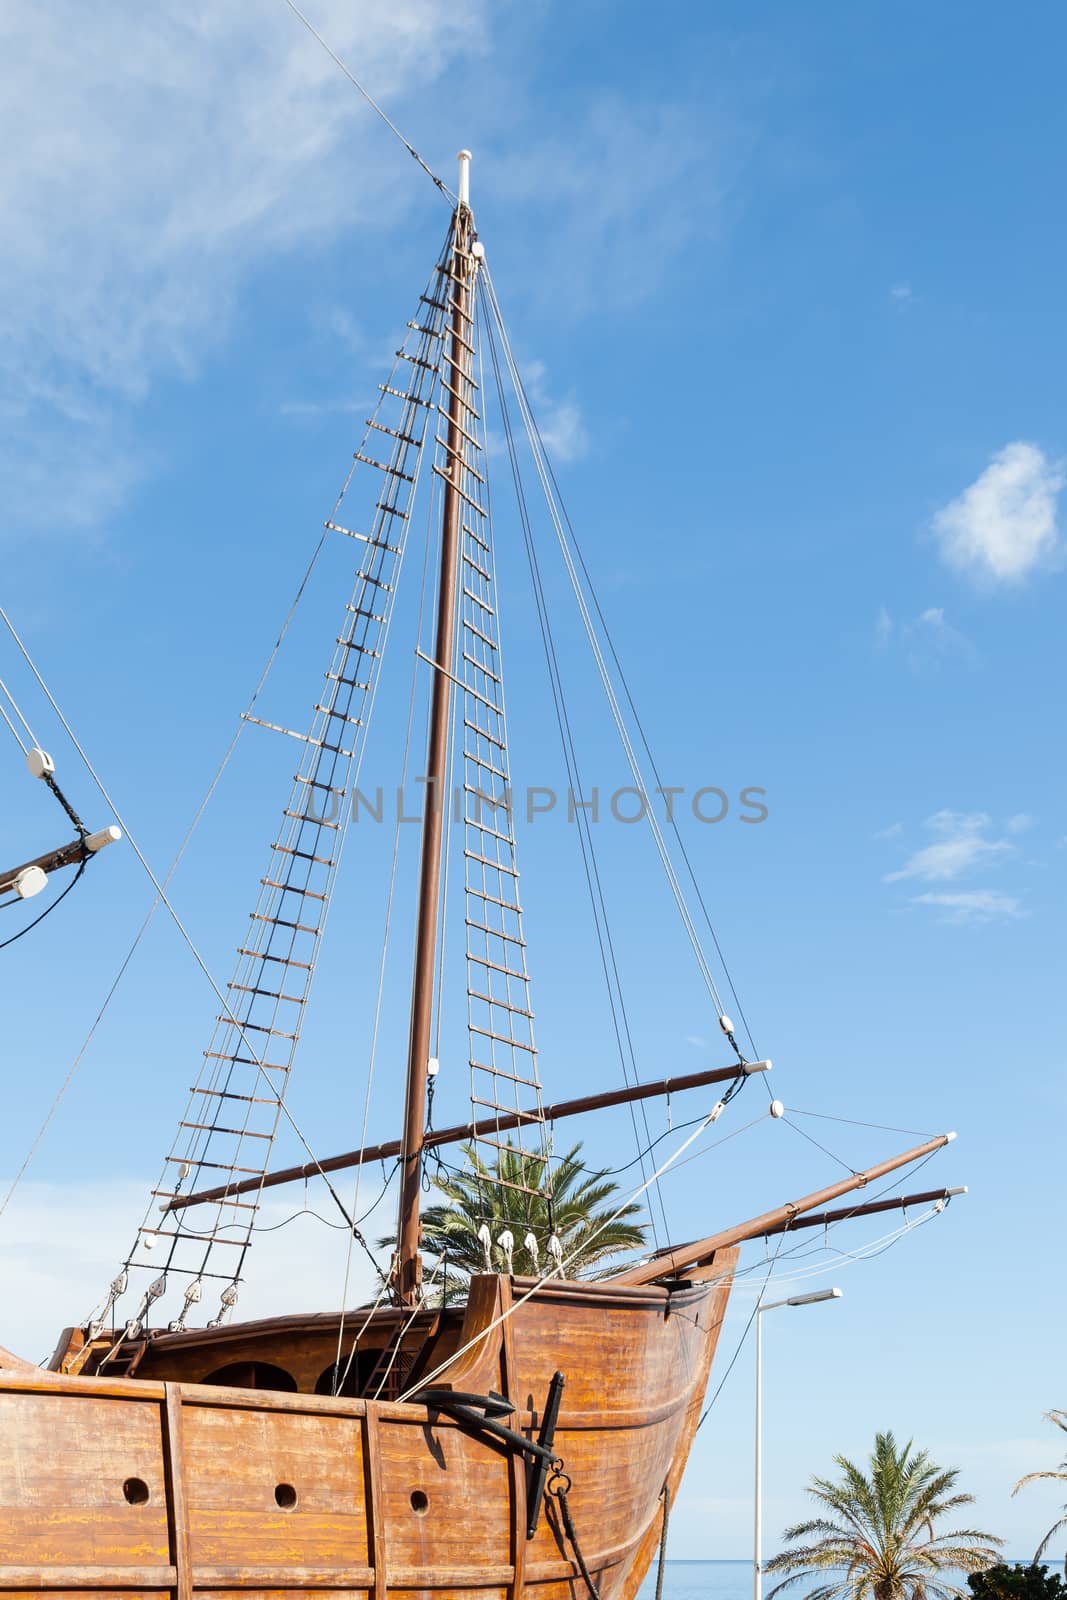 A Reconstructed Christopher Columbus Caravel by ATGImages